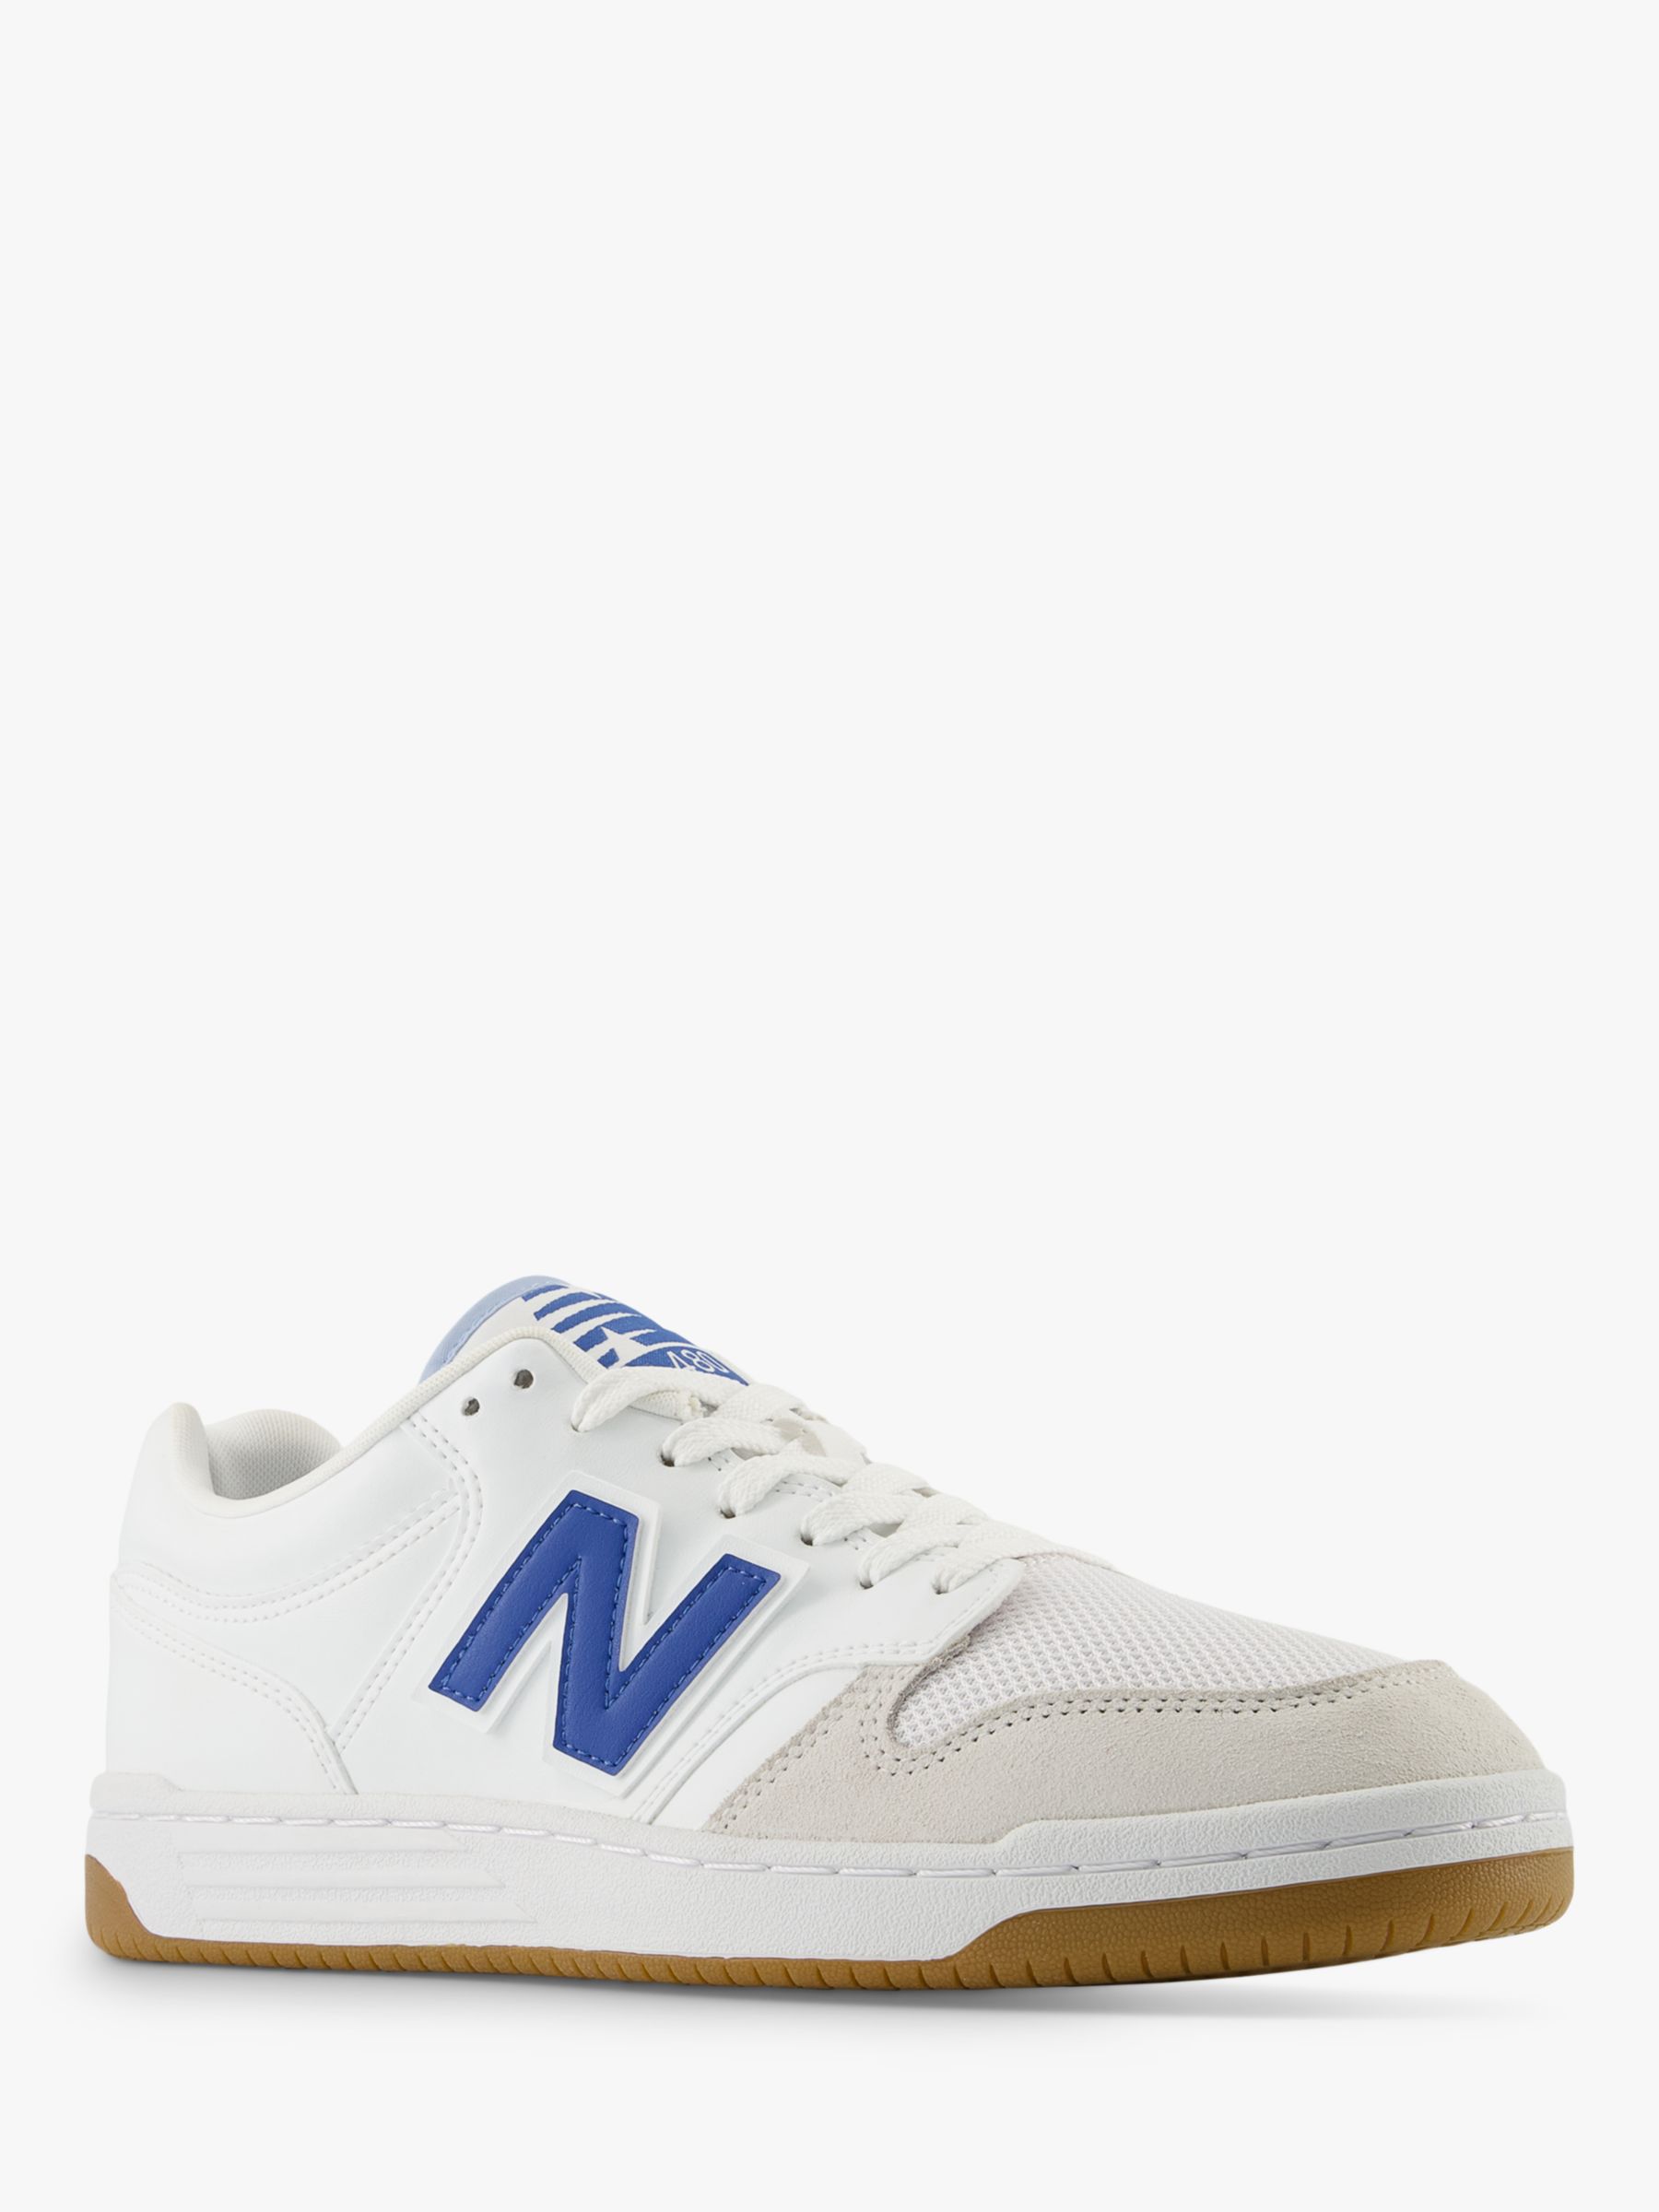 Buy New Balance 480 Leather Trainers Online at johnlewis.com